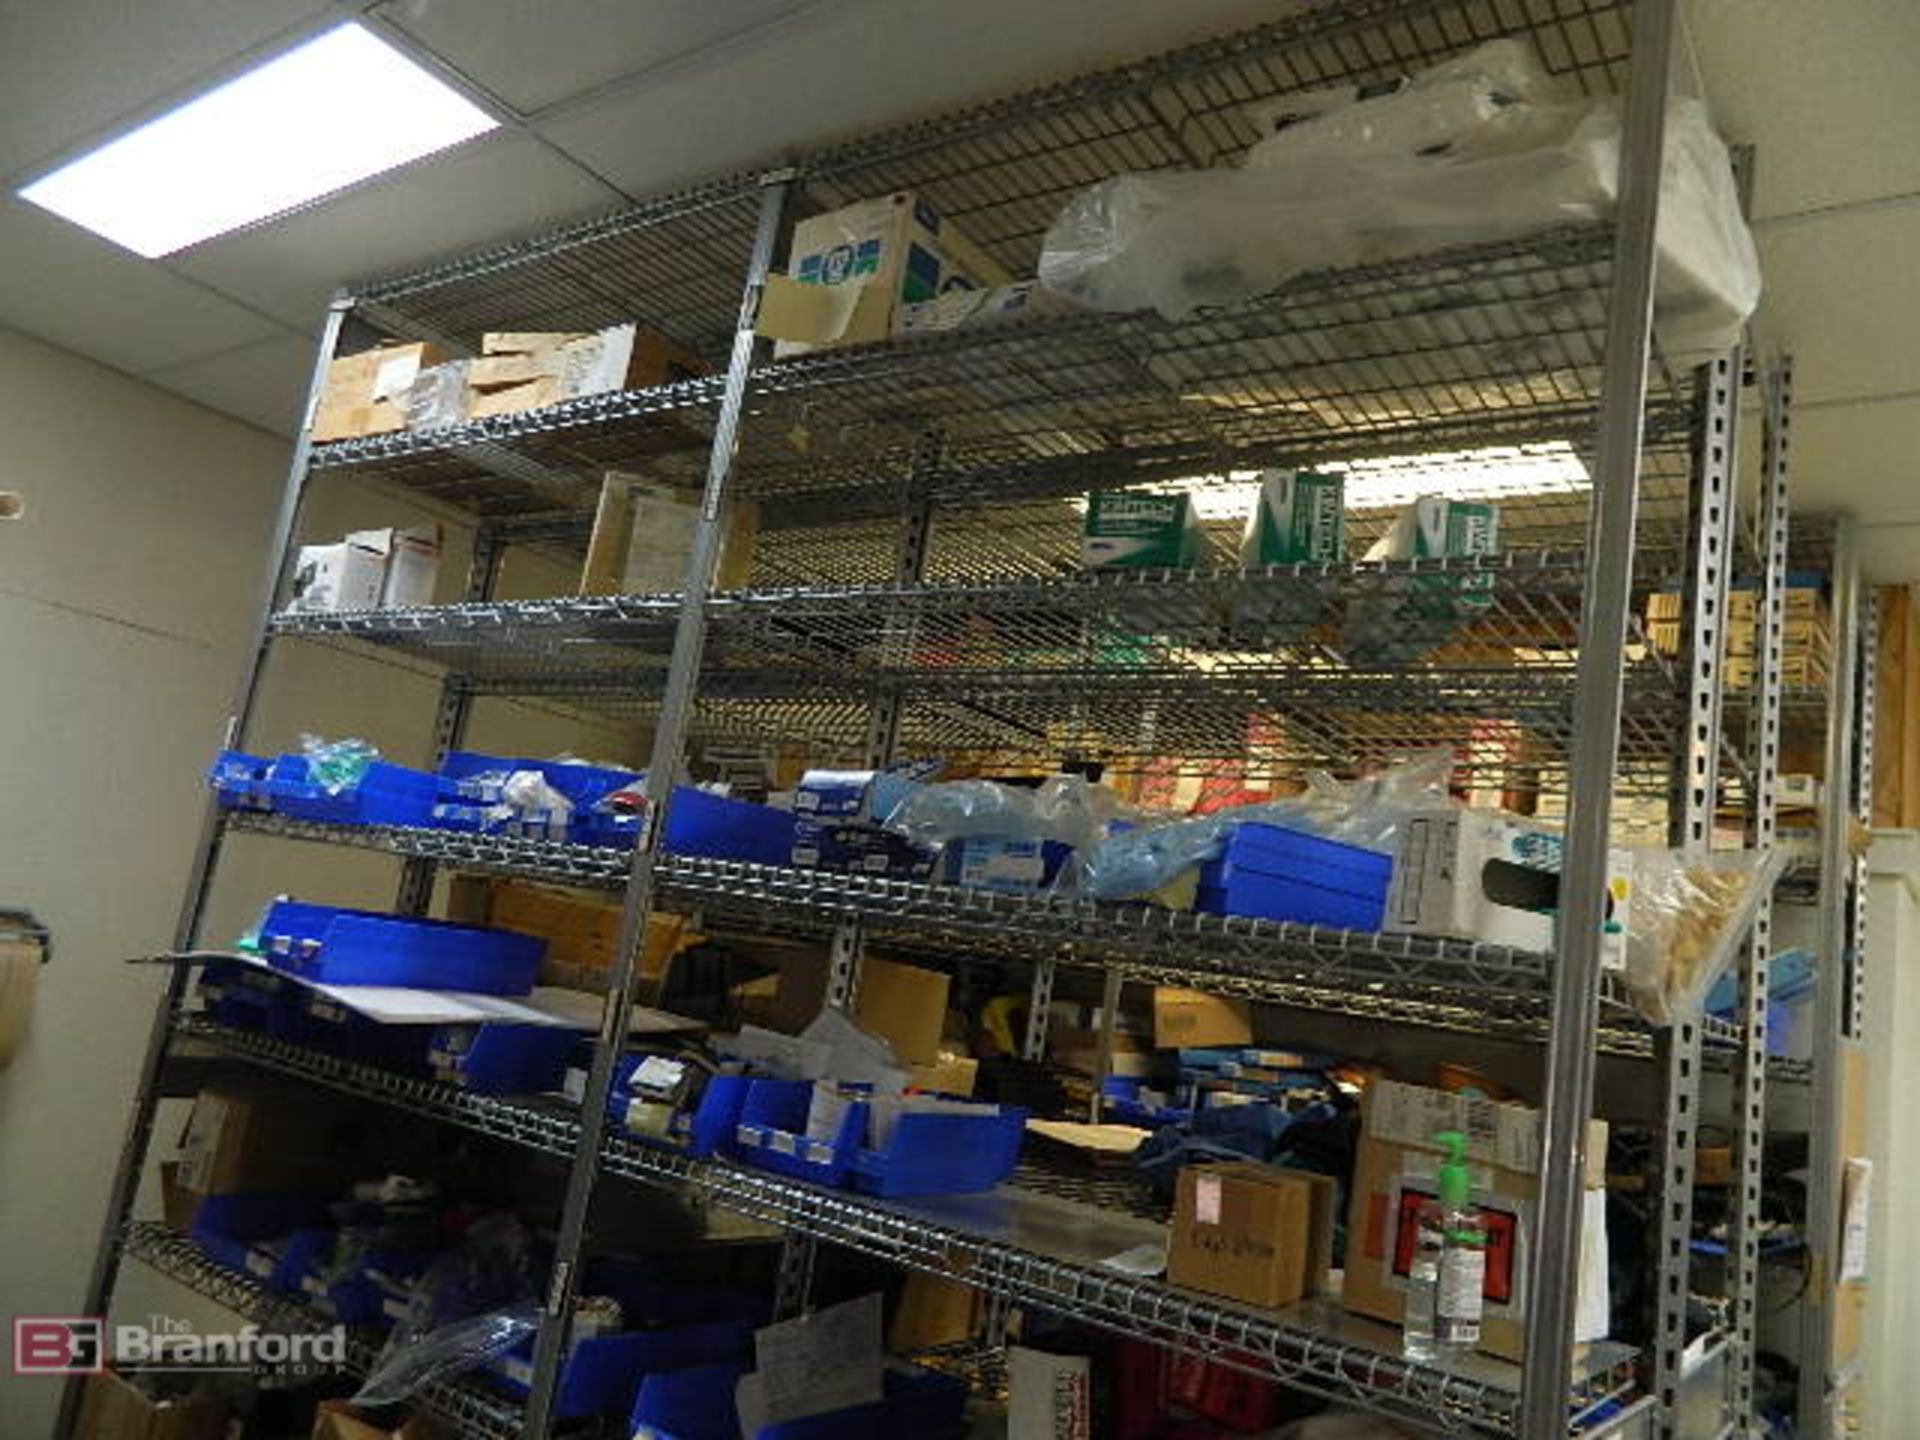 Parts Cage Supply Room - Image 18 of 23